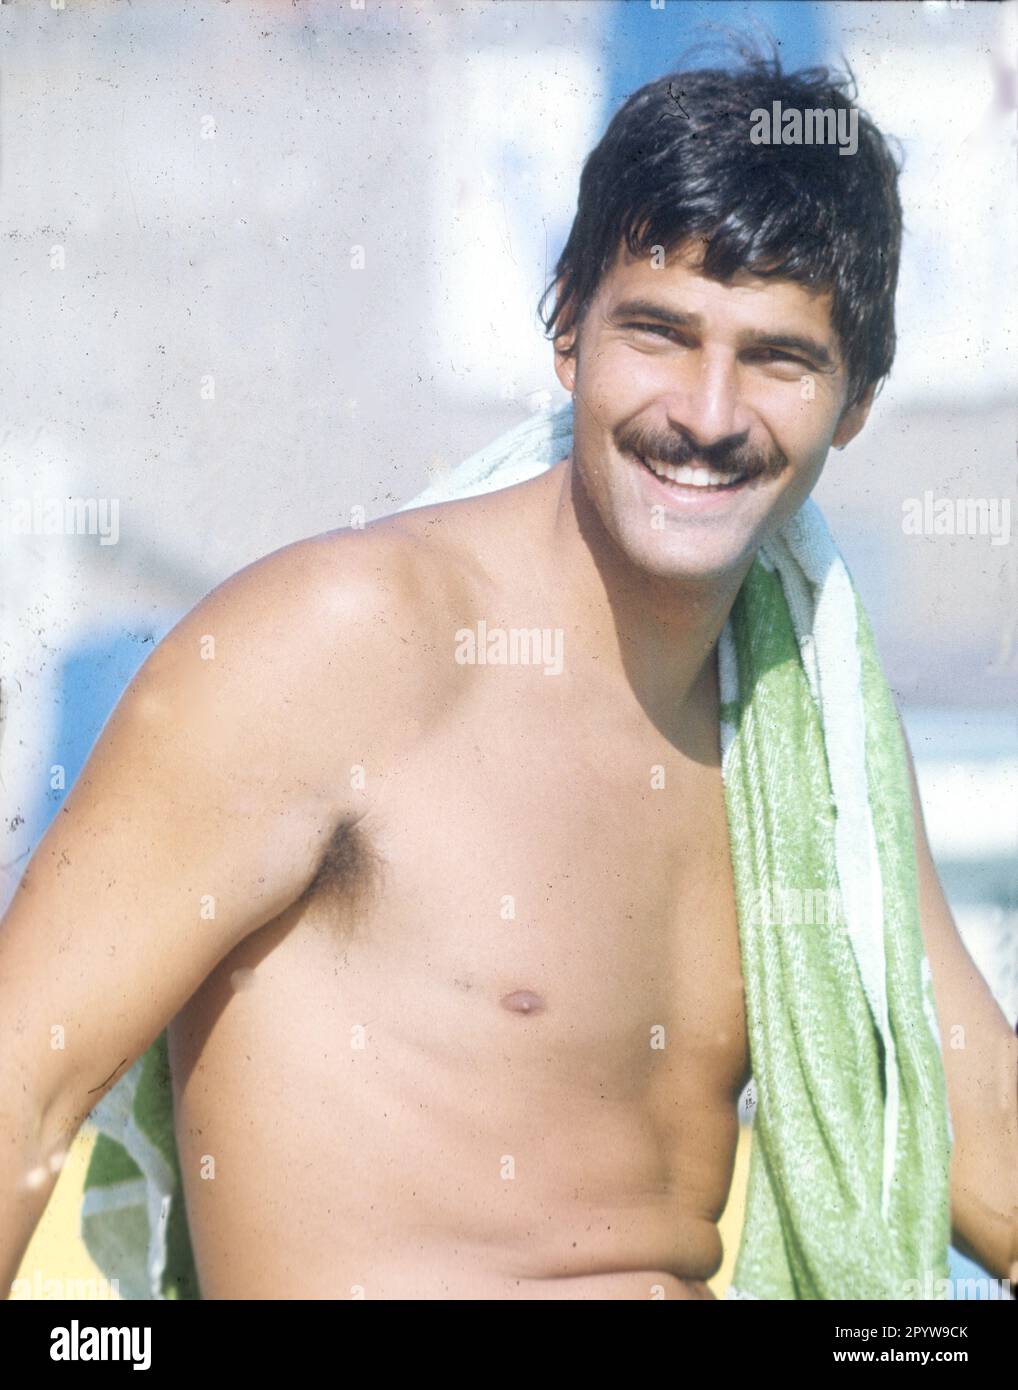 Swimming - European Championships in Jönköping (Sweden) 1977 / Guest the seven-time Olympic champion of Munich 1972, Mark Spitz (USA), did not miss it to test the competition pool 18.08.1977. Mark Spitz portrait, laughs, positive with towel over his shoulder [automated translation] Stock Photo